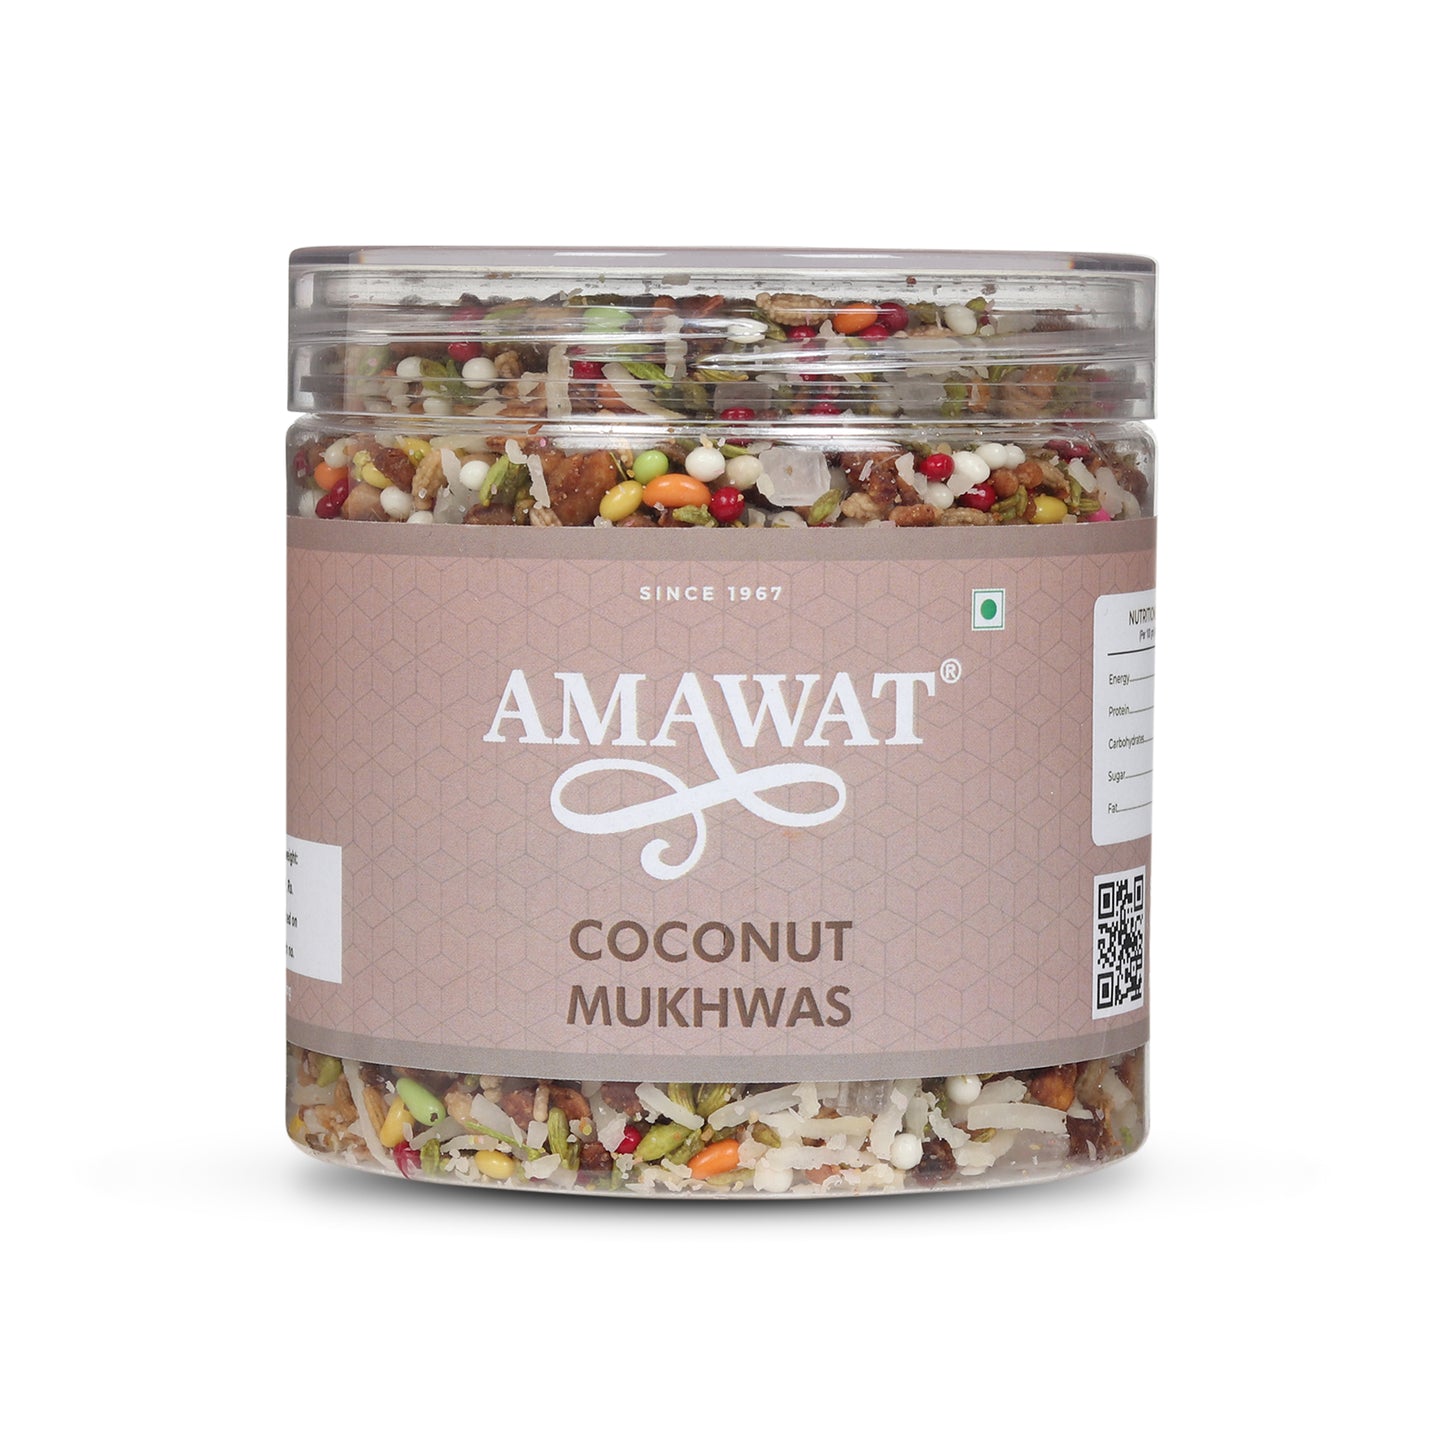 Shop coconut mukhwas from amawat